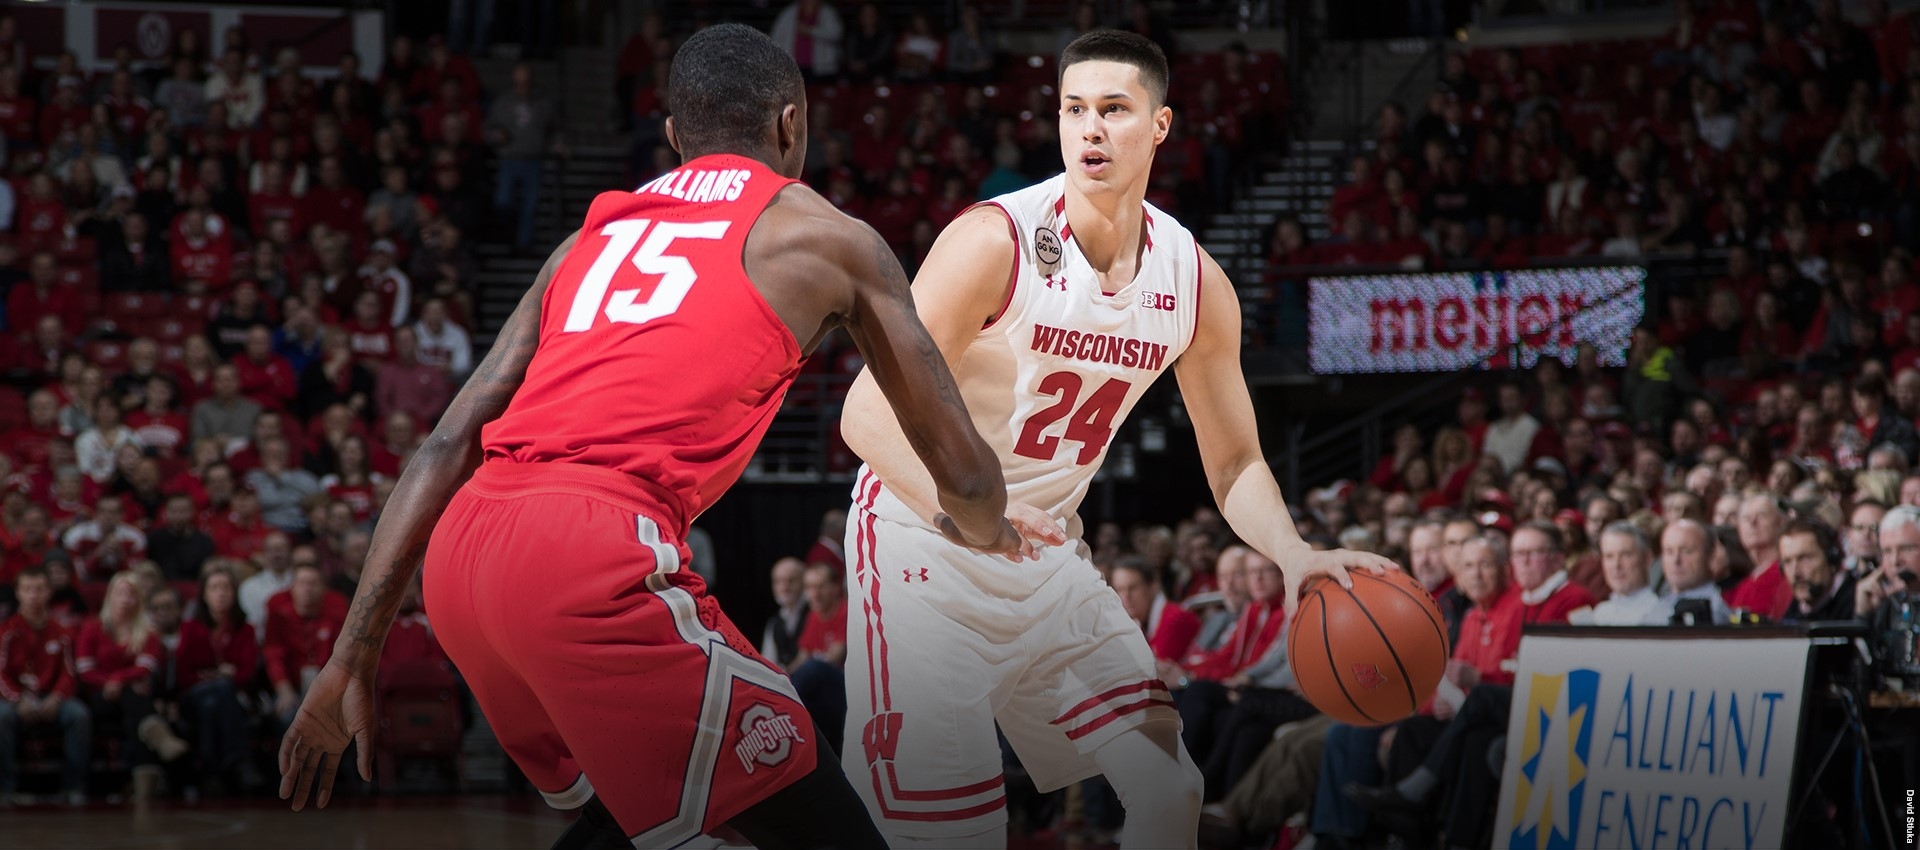 La Crosse’s Koenig on fire as Badgers blow out Ohio State